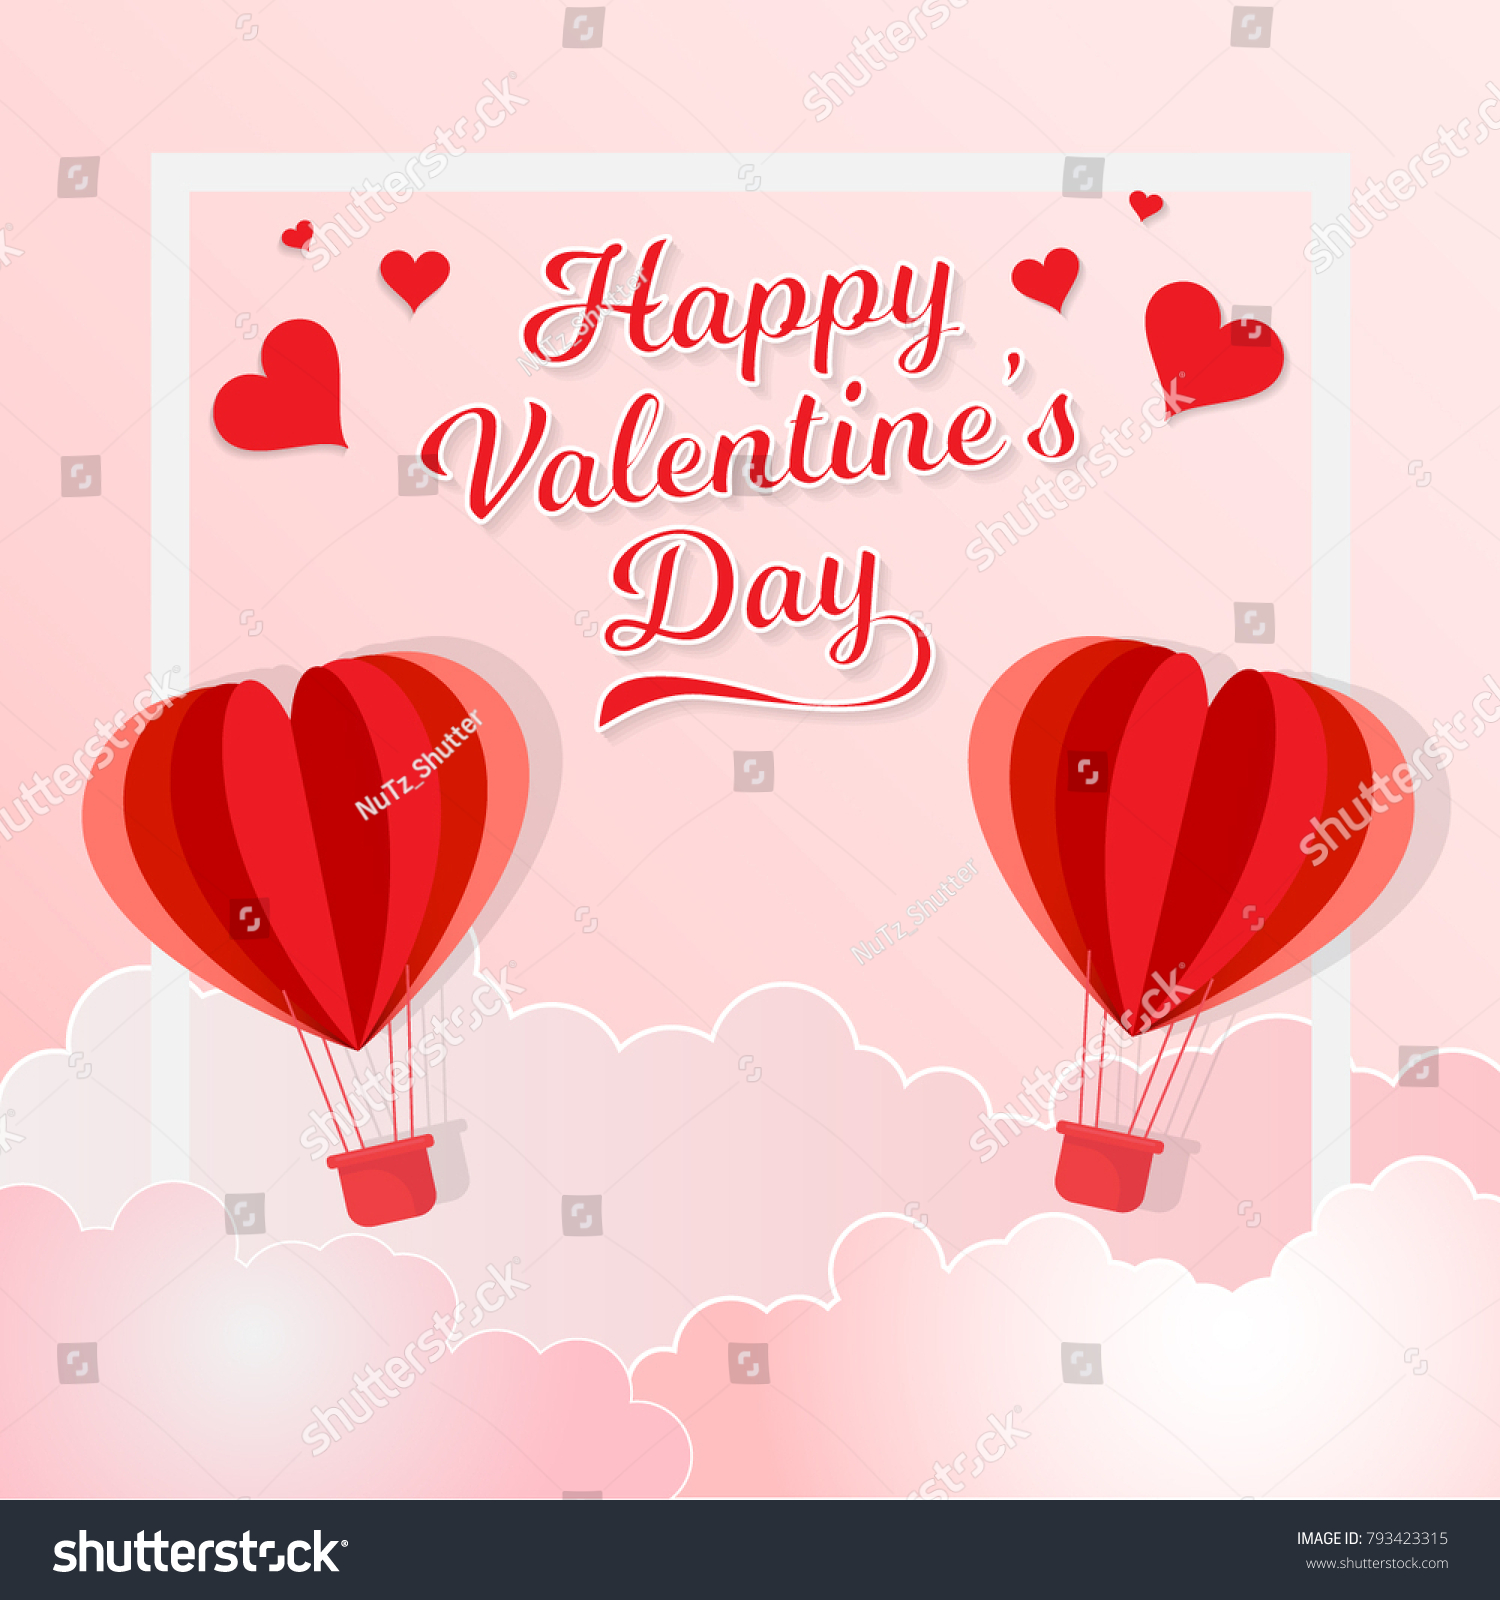 Illustration of red heart balloon flying on the sky with the words for valentine's day #793423315